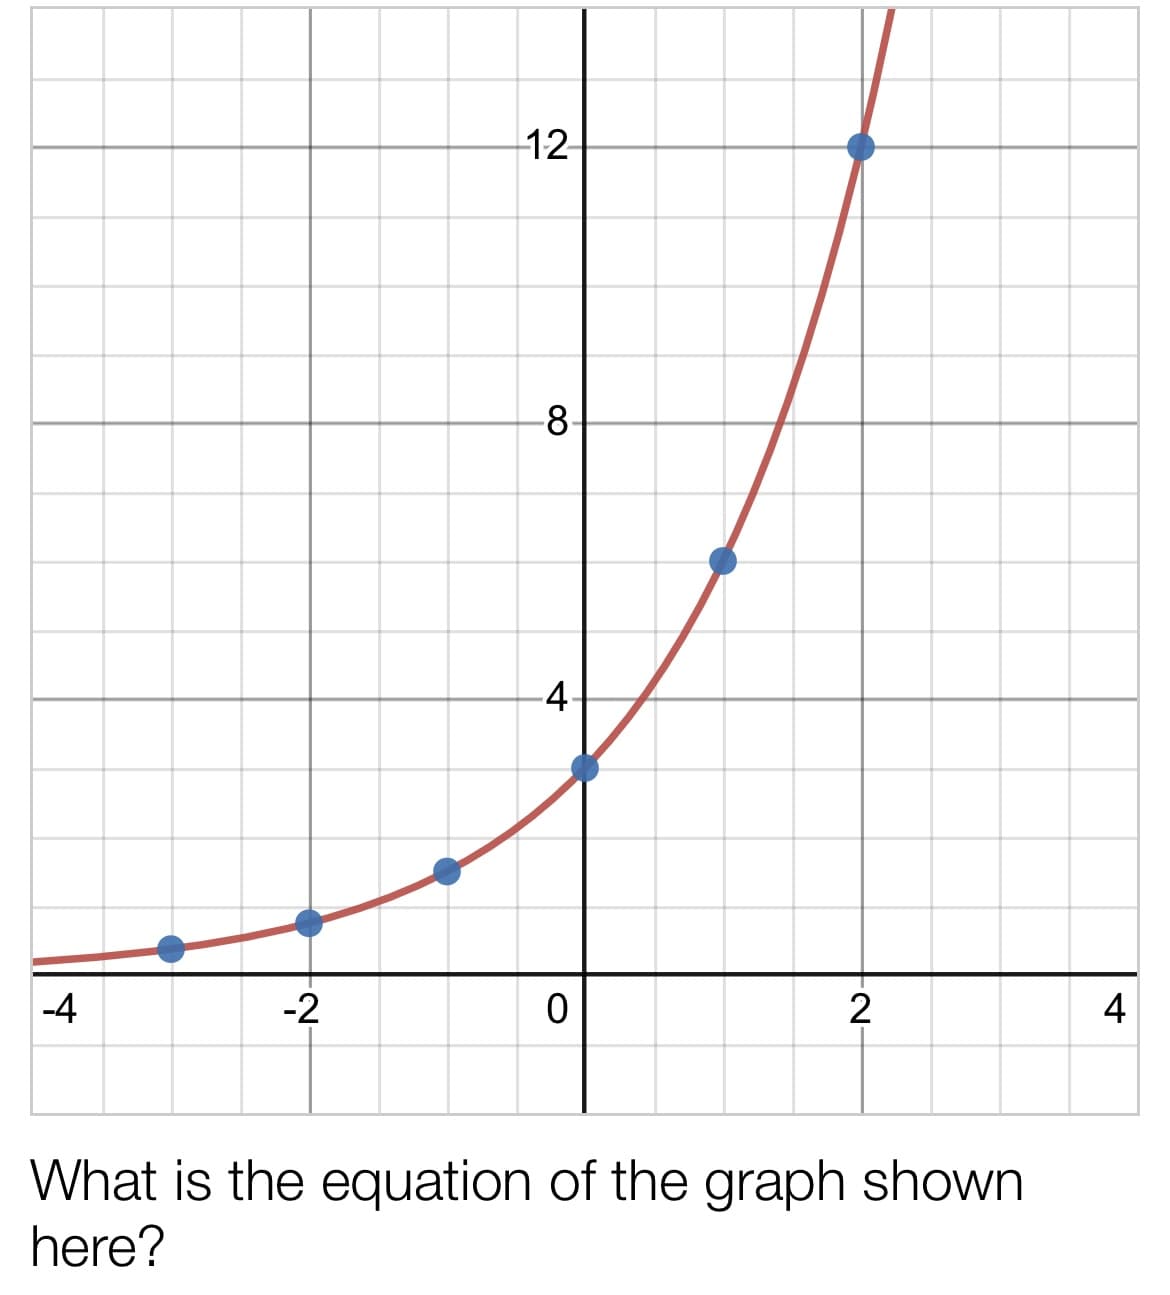 -4
-2
12
-8
-4
0
2
What is the equation of the graph shown
here?
4